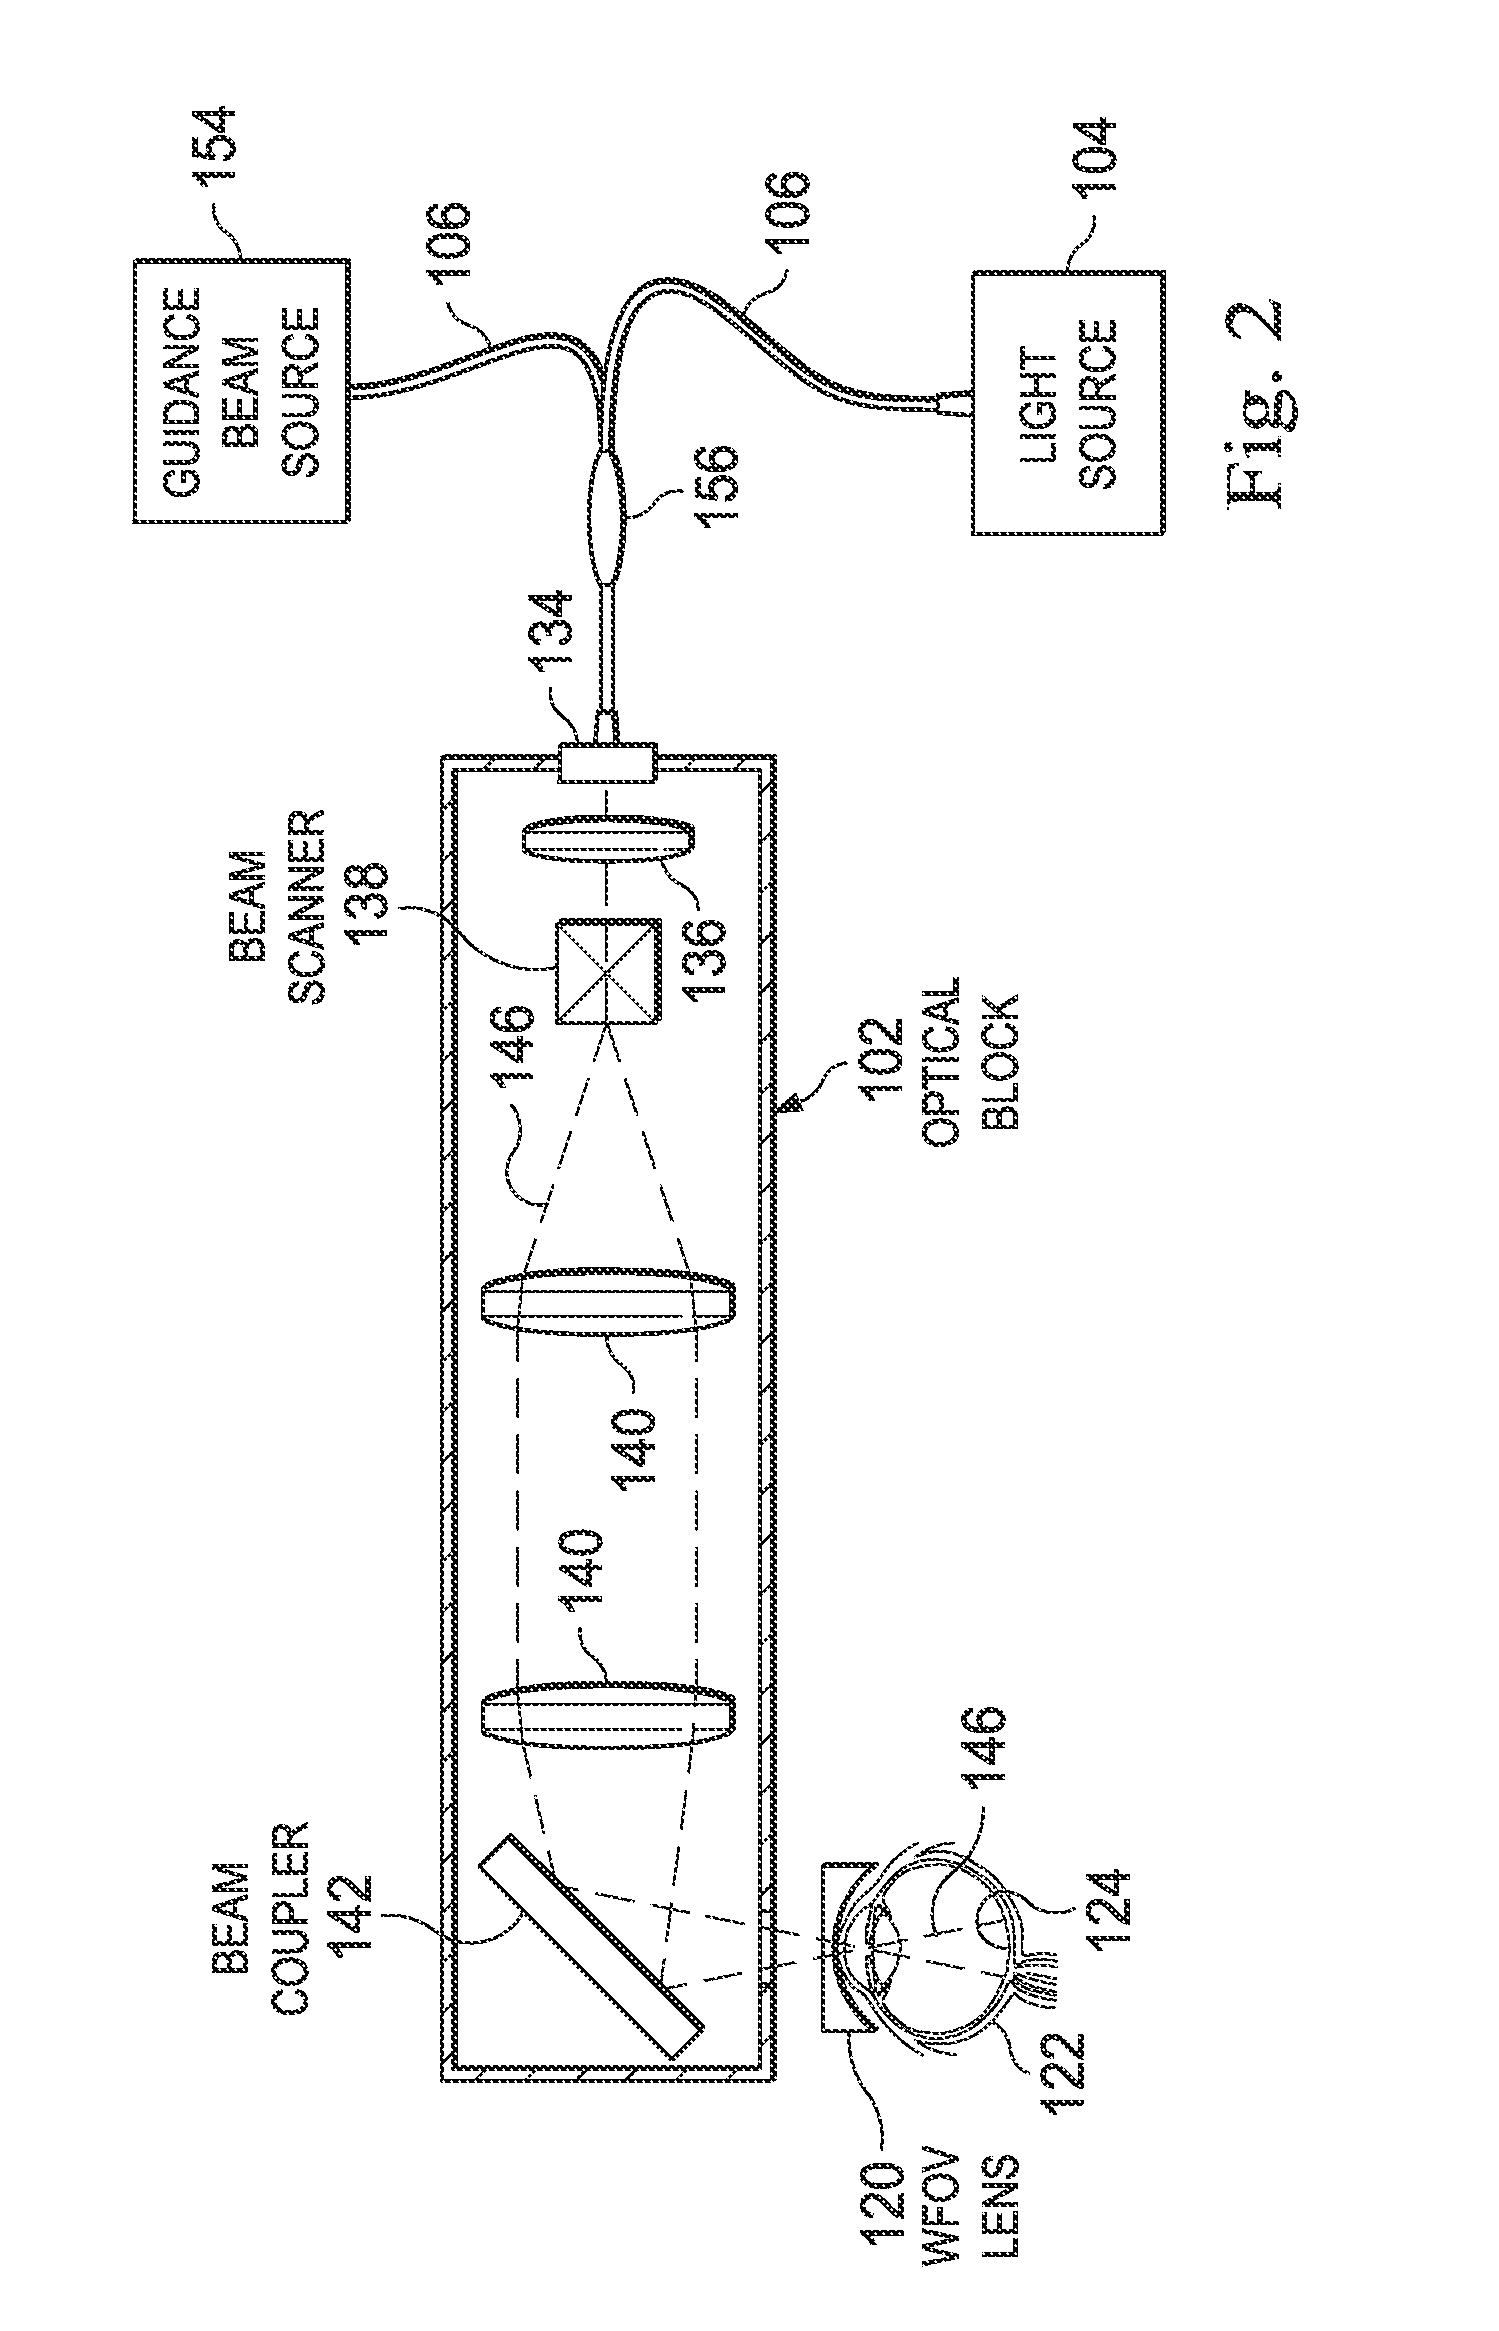 Movable wide-angle ophthalmic surgical system